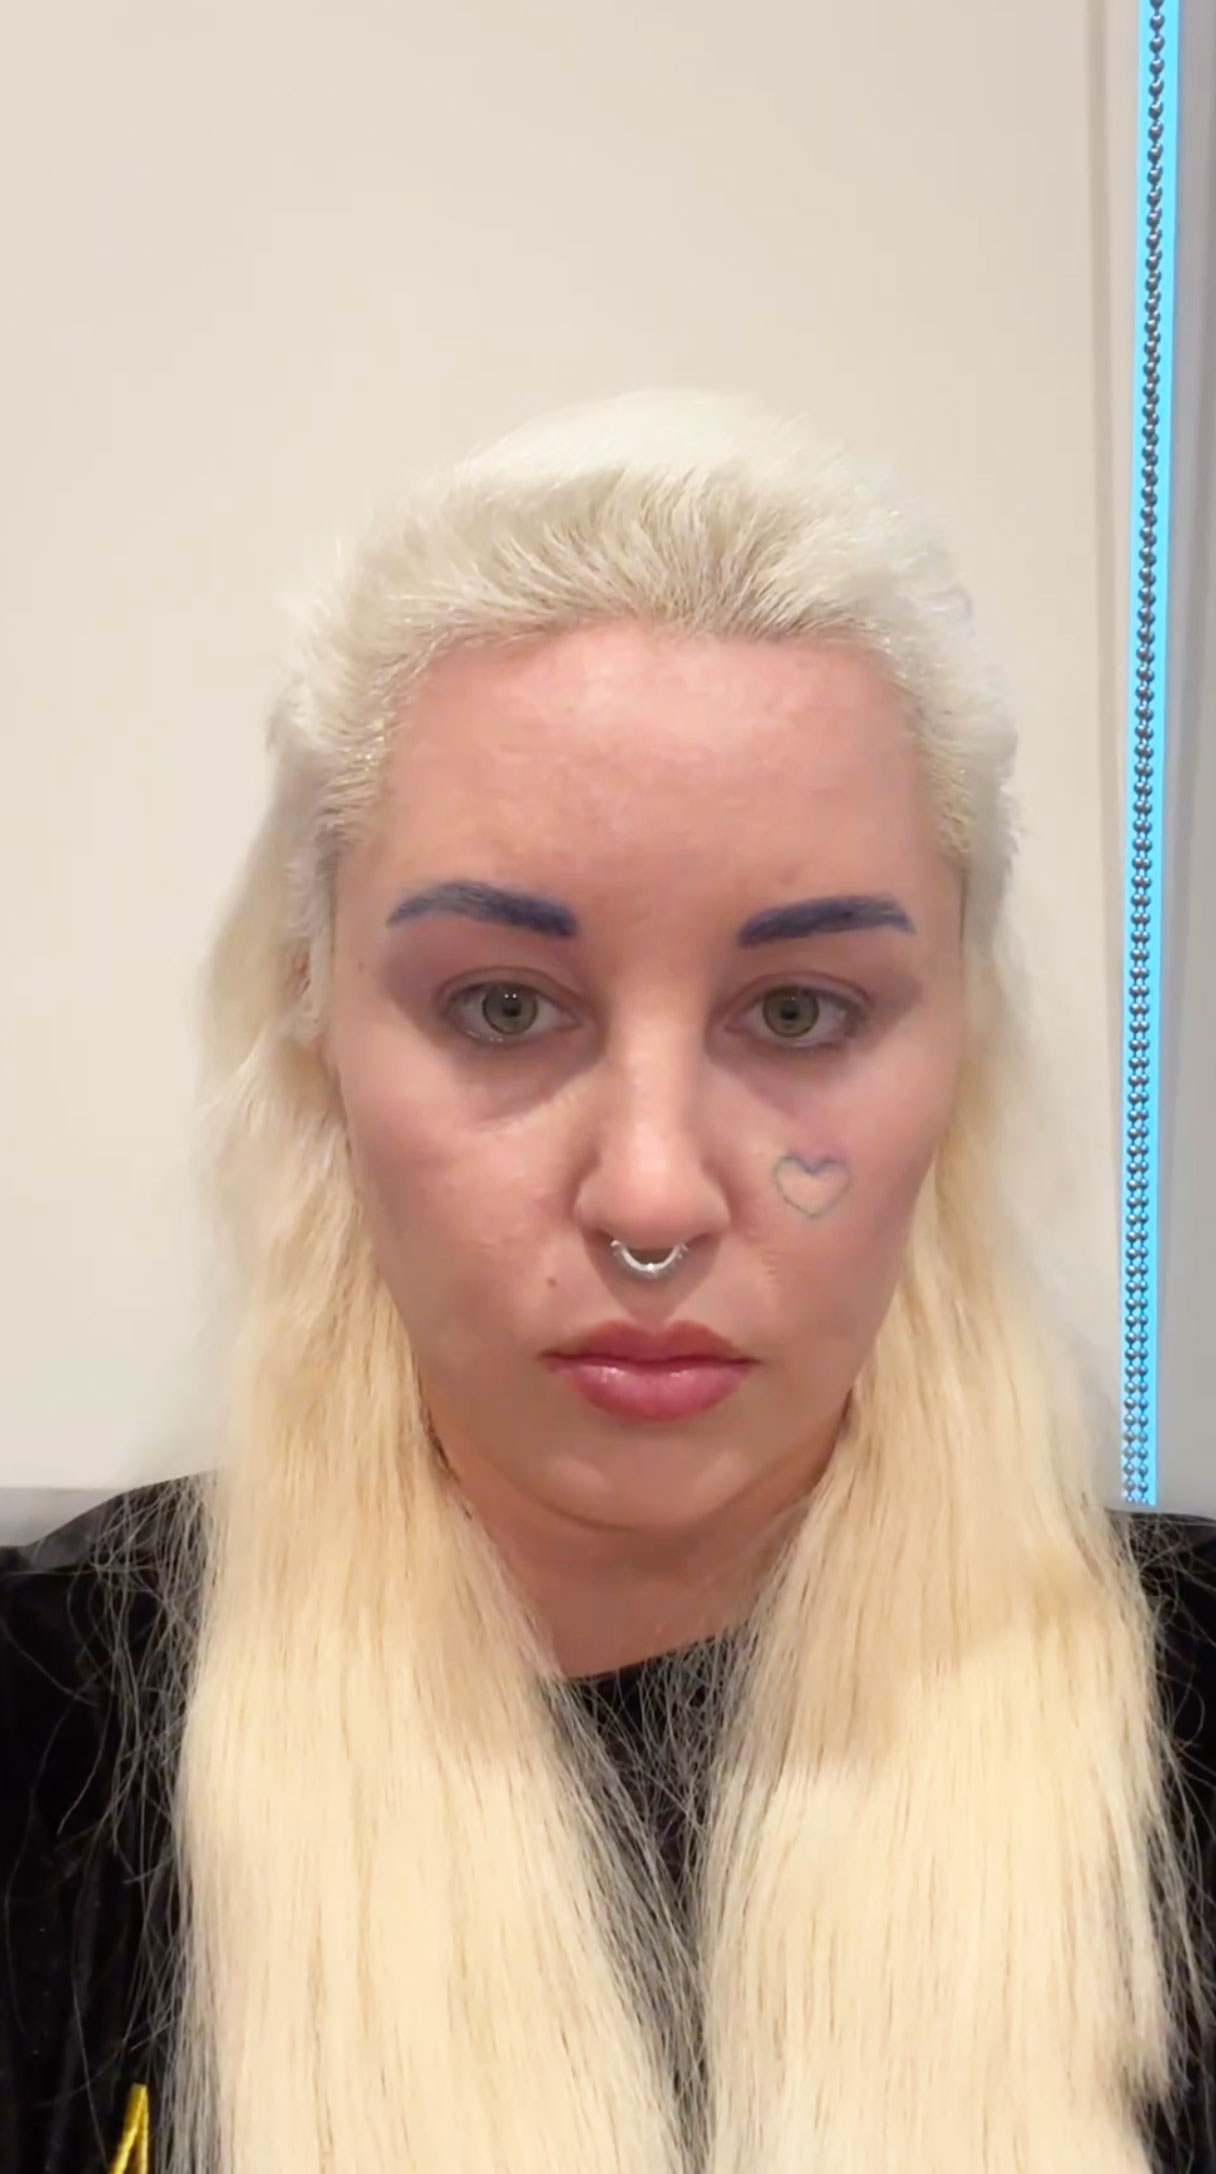 Amanda Bynes Looks Unrecognizable With Blond And Blue Hair As 